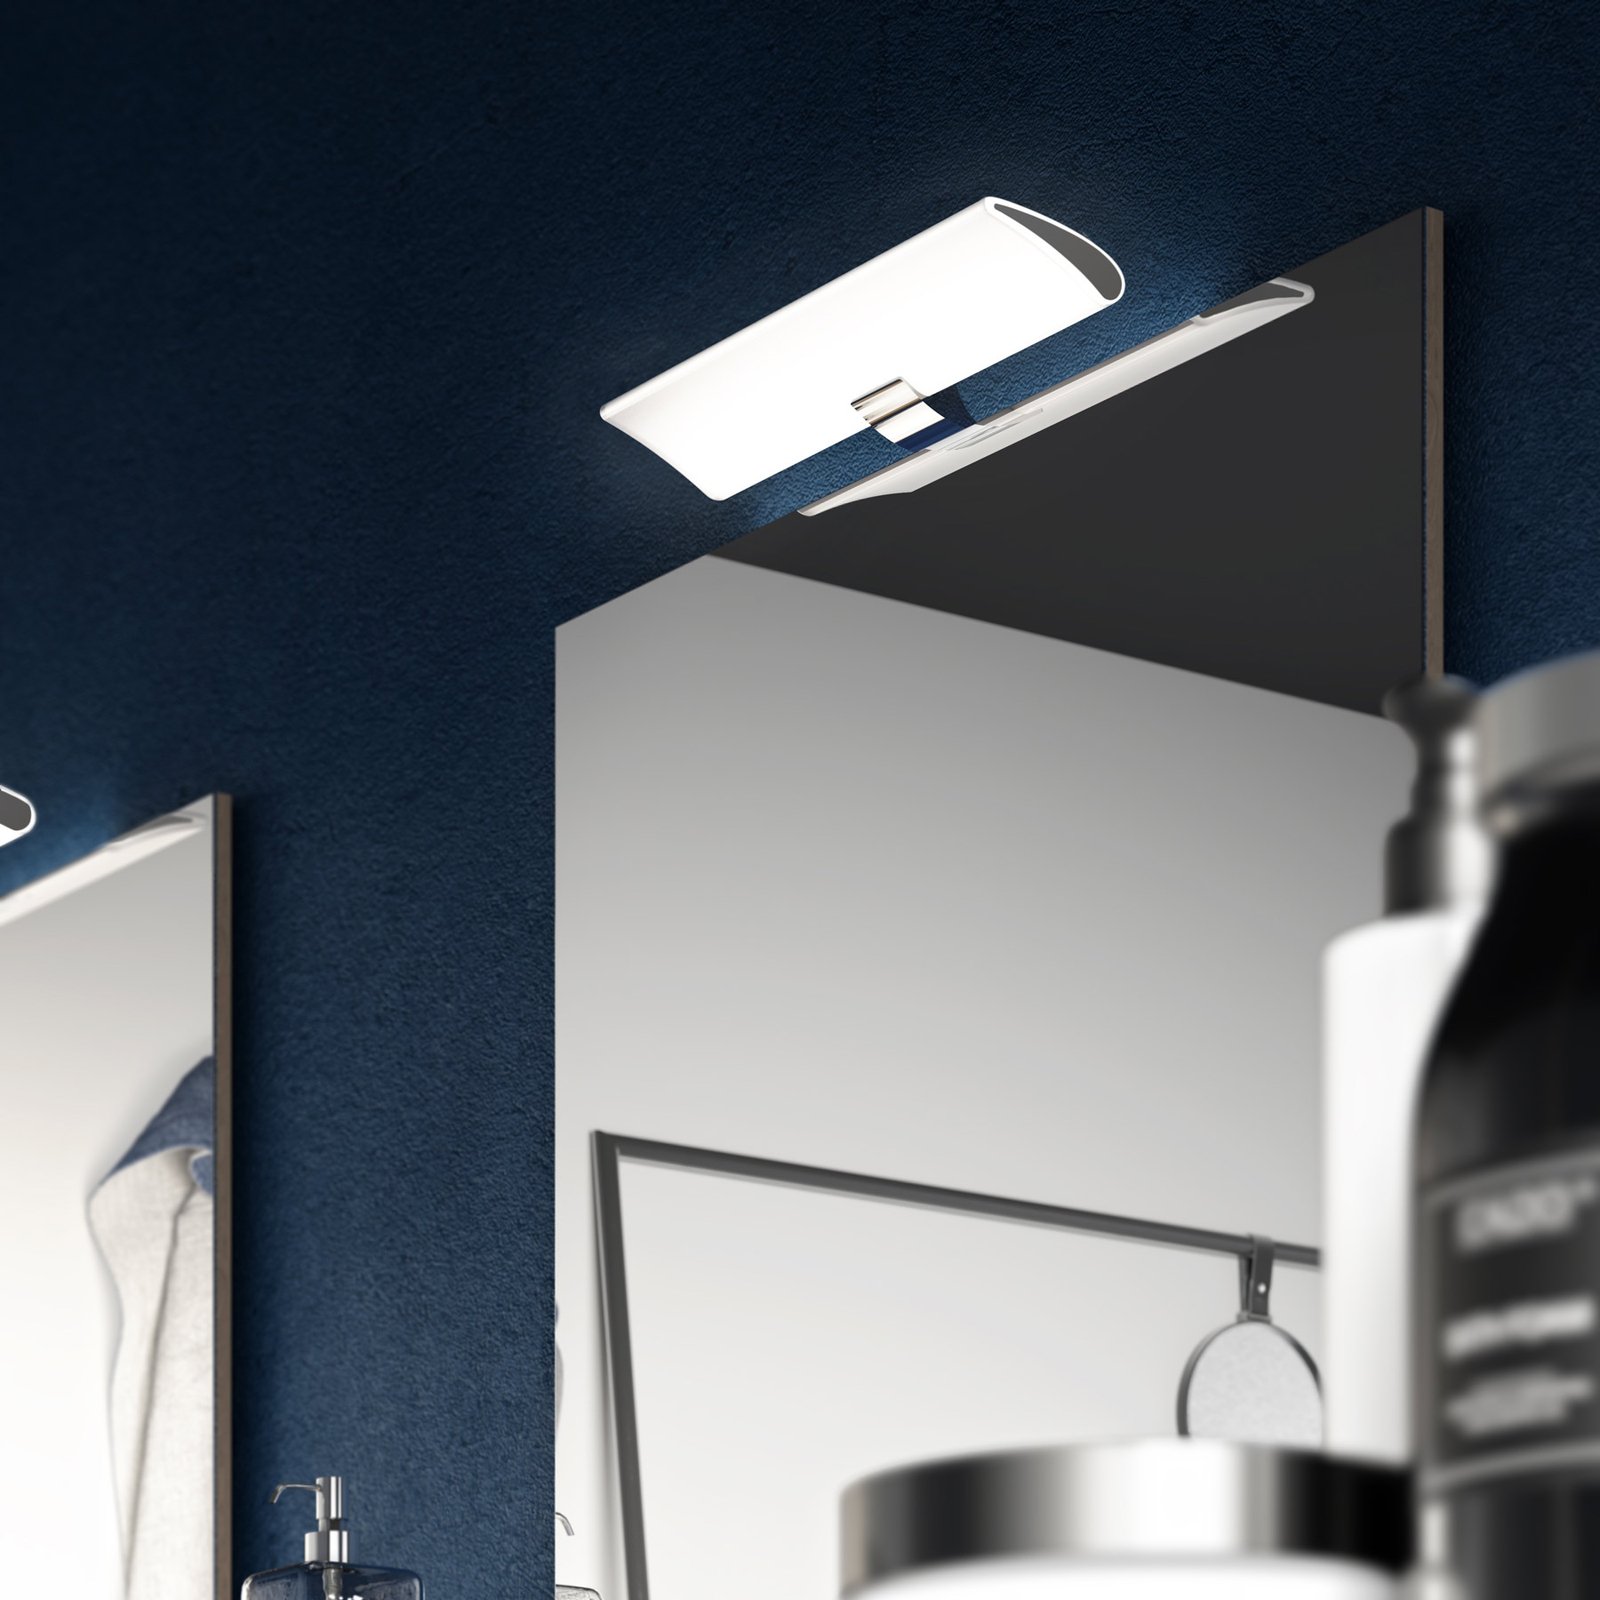 Miracle LED mirror light in chrome, width 80 cm